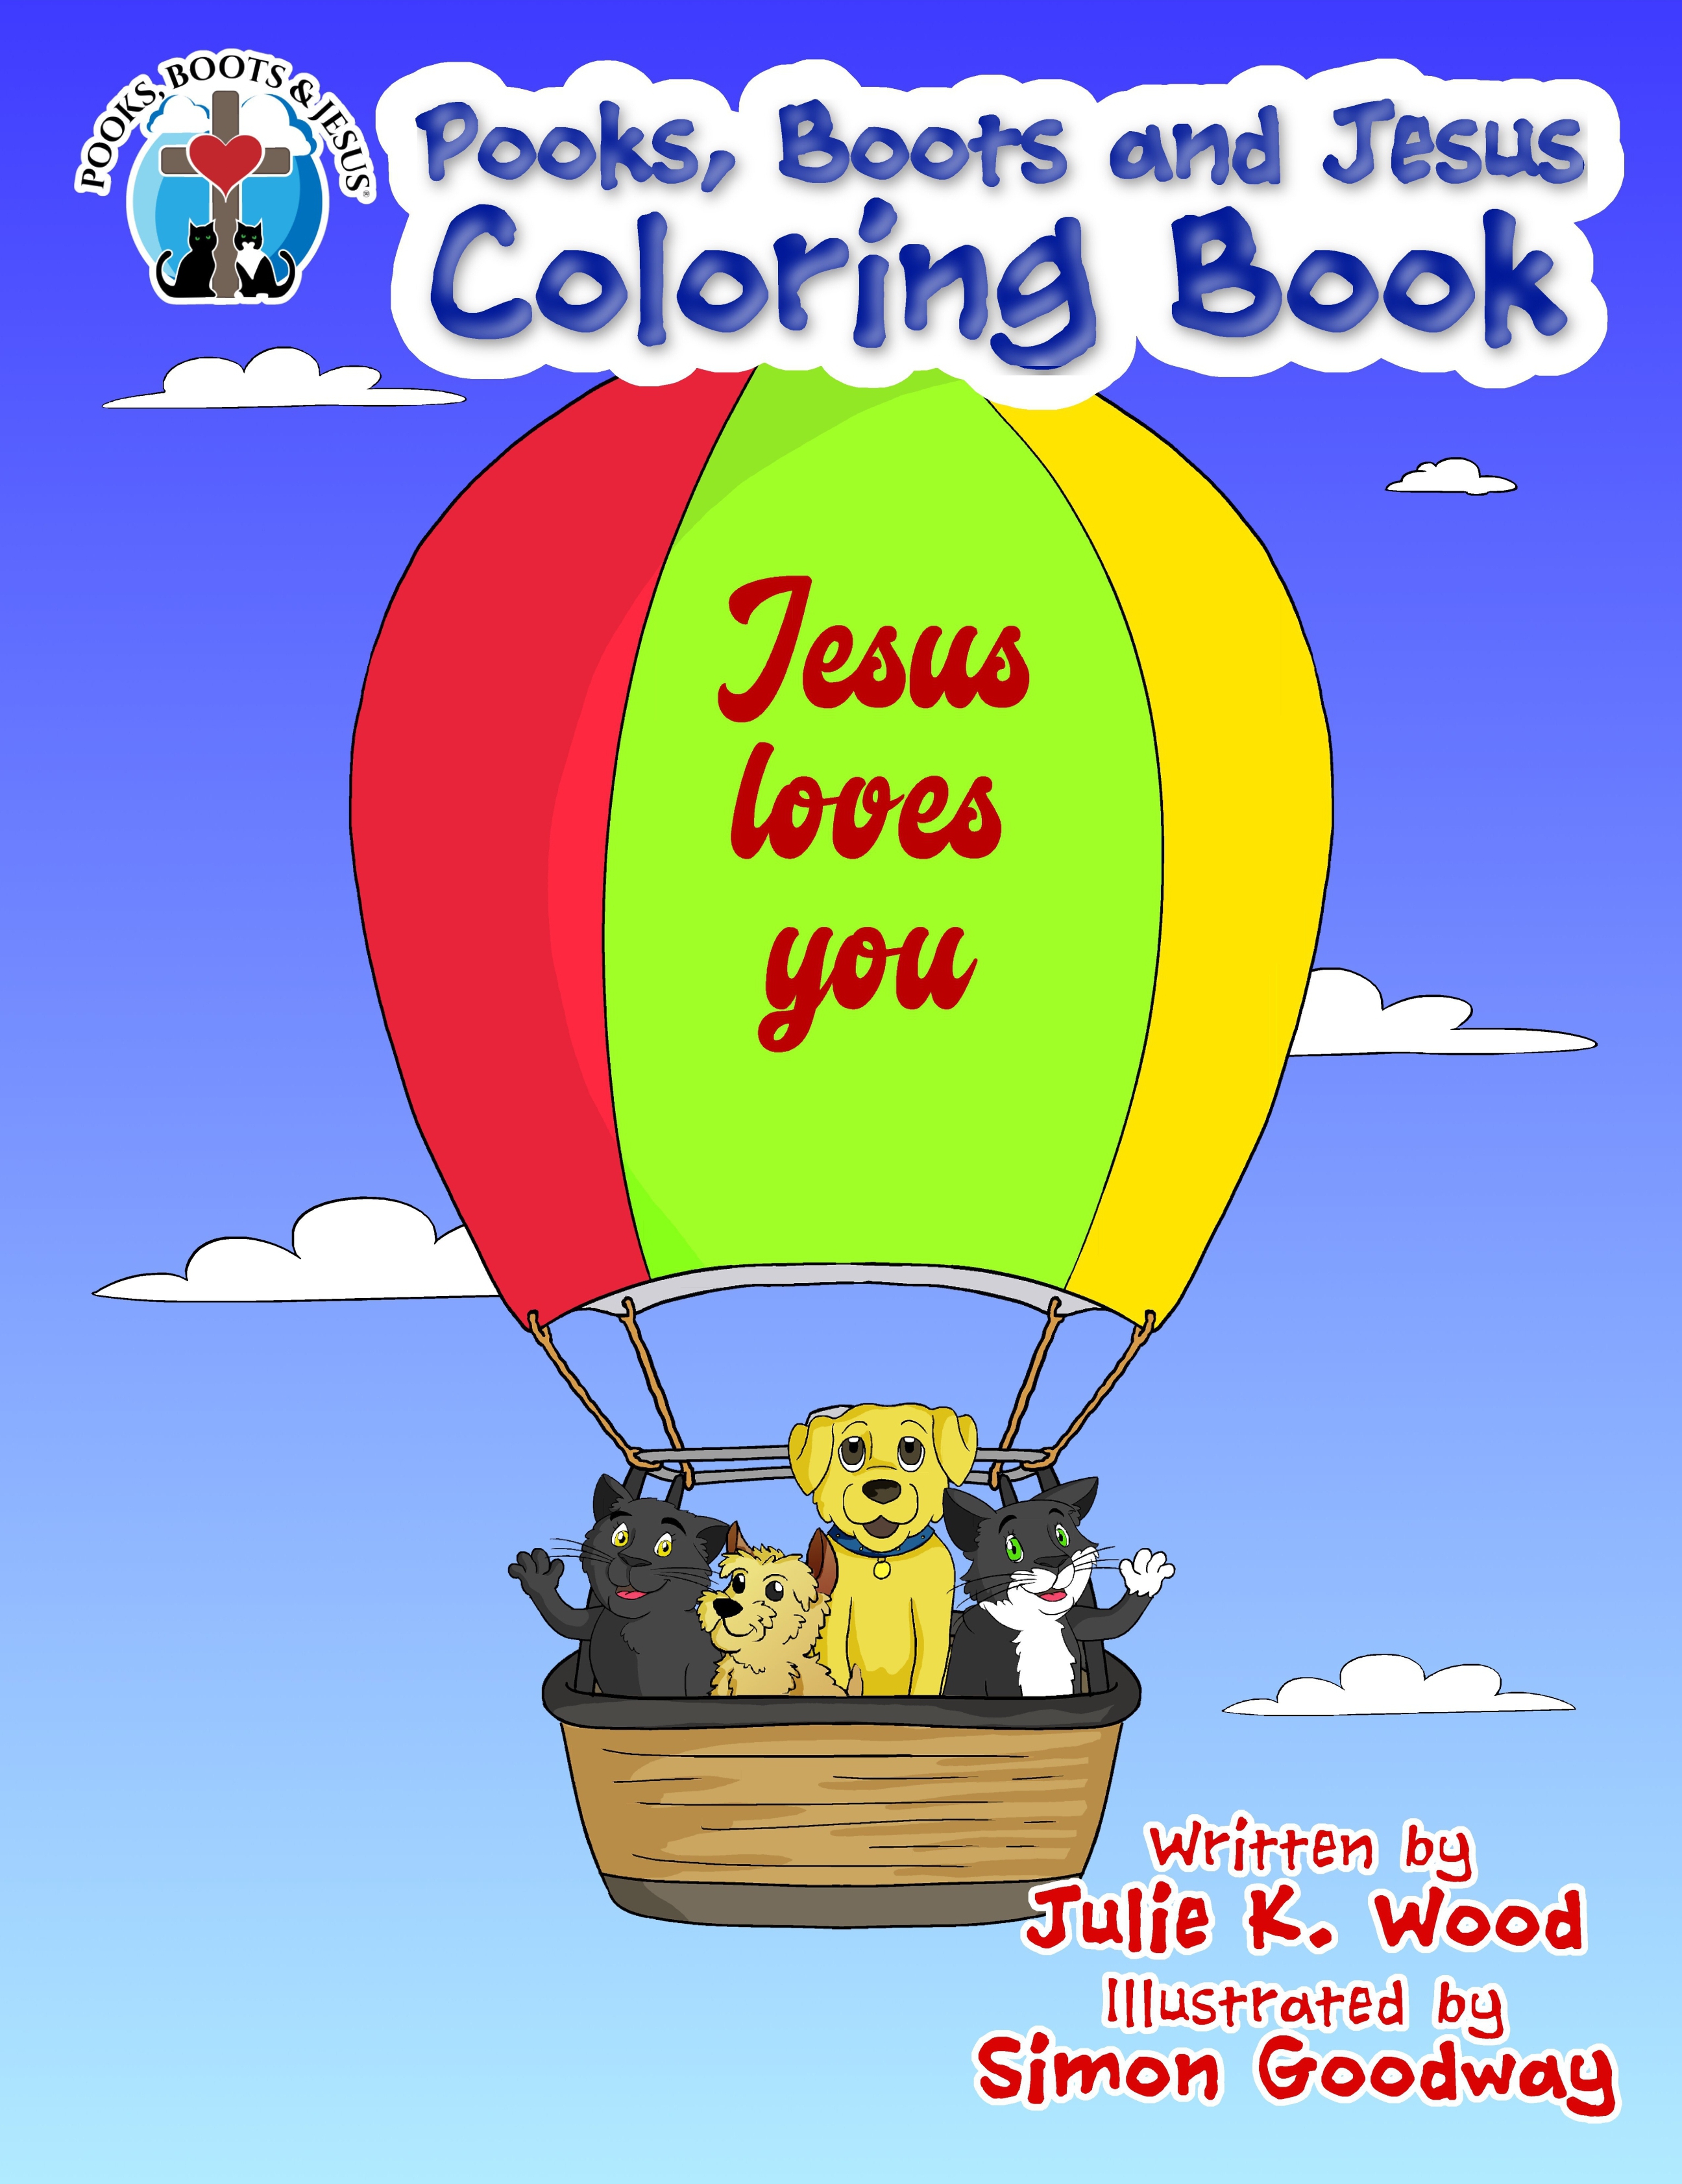 New Book Added to the Series "Pooks, Boots, and Jesus," from Author Julie K. Wood